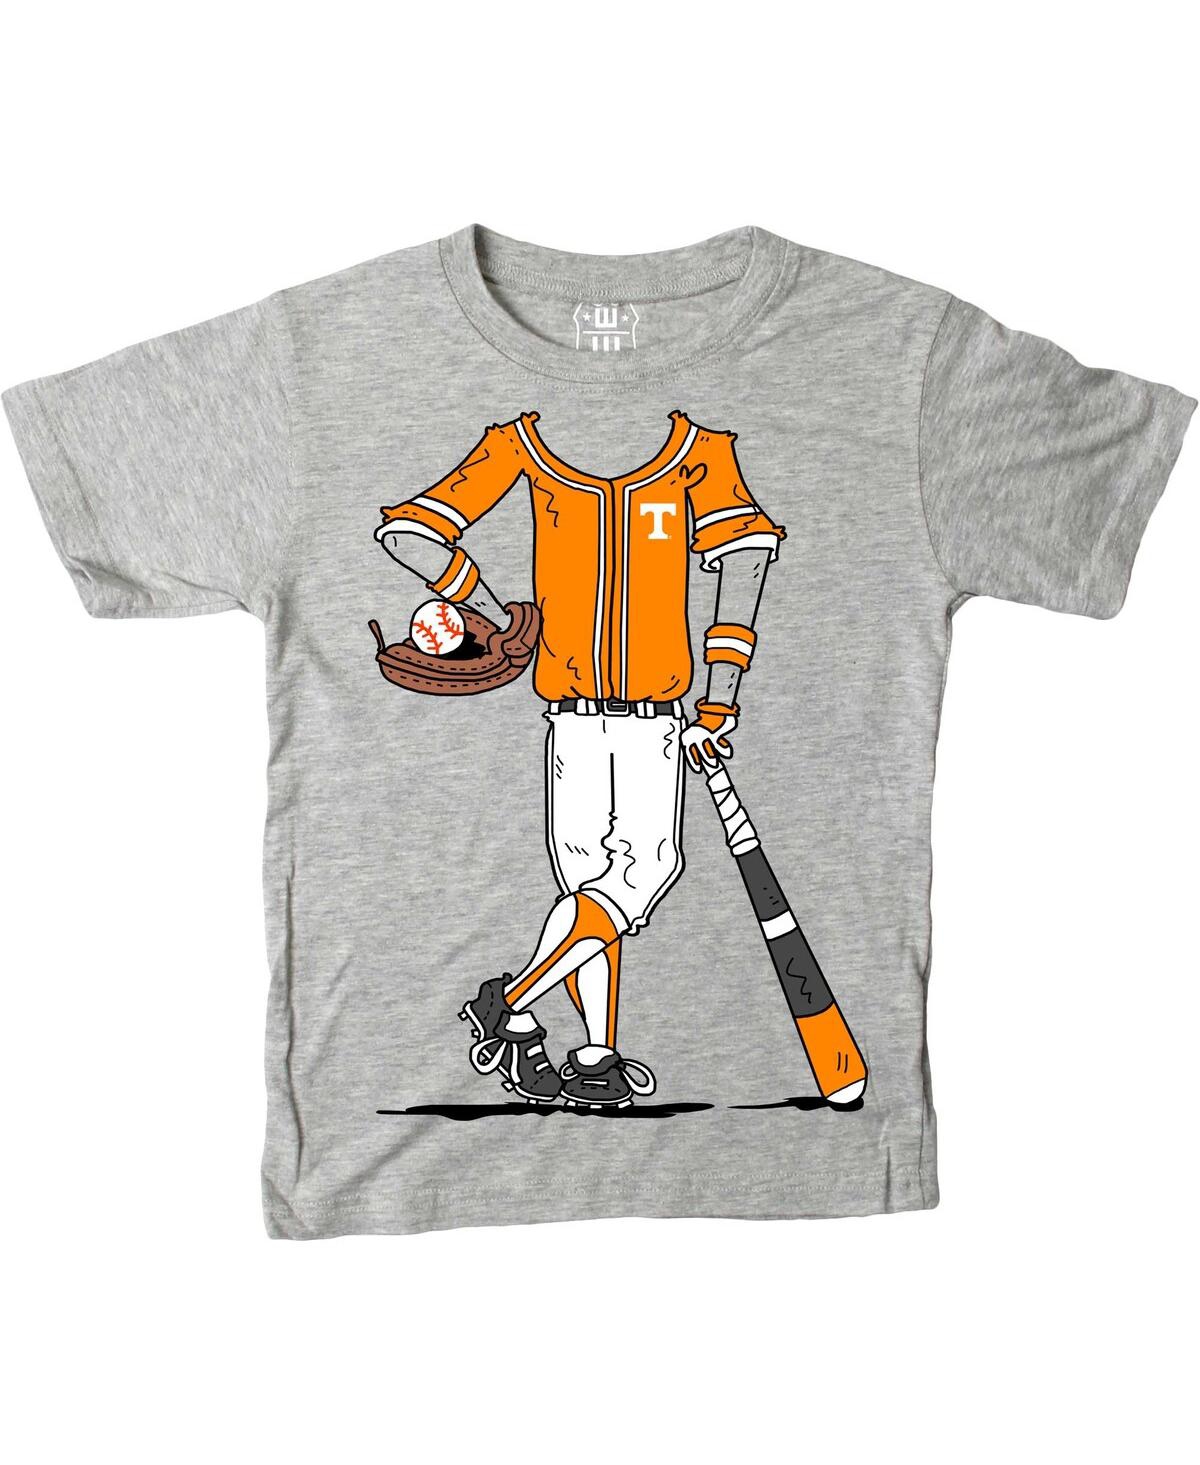 Wes Willy Youth Gray Tennessee Volunteers Baseball Player T-Shirt - Gray